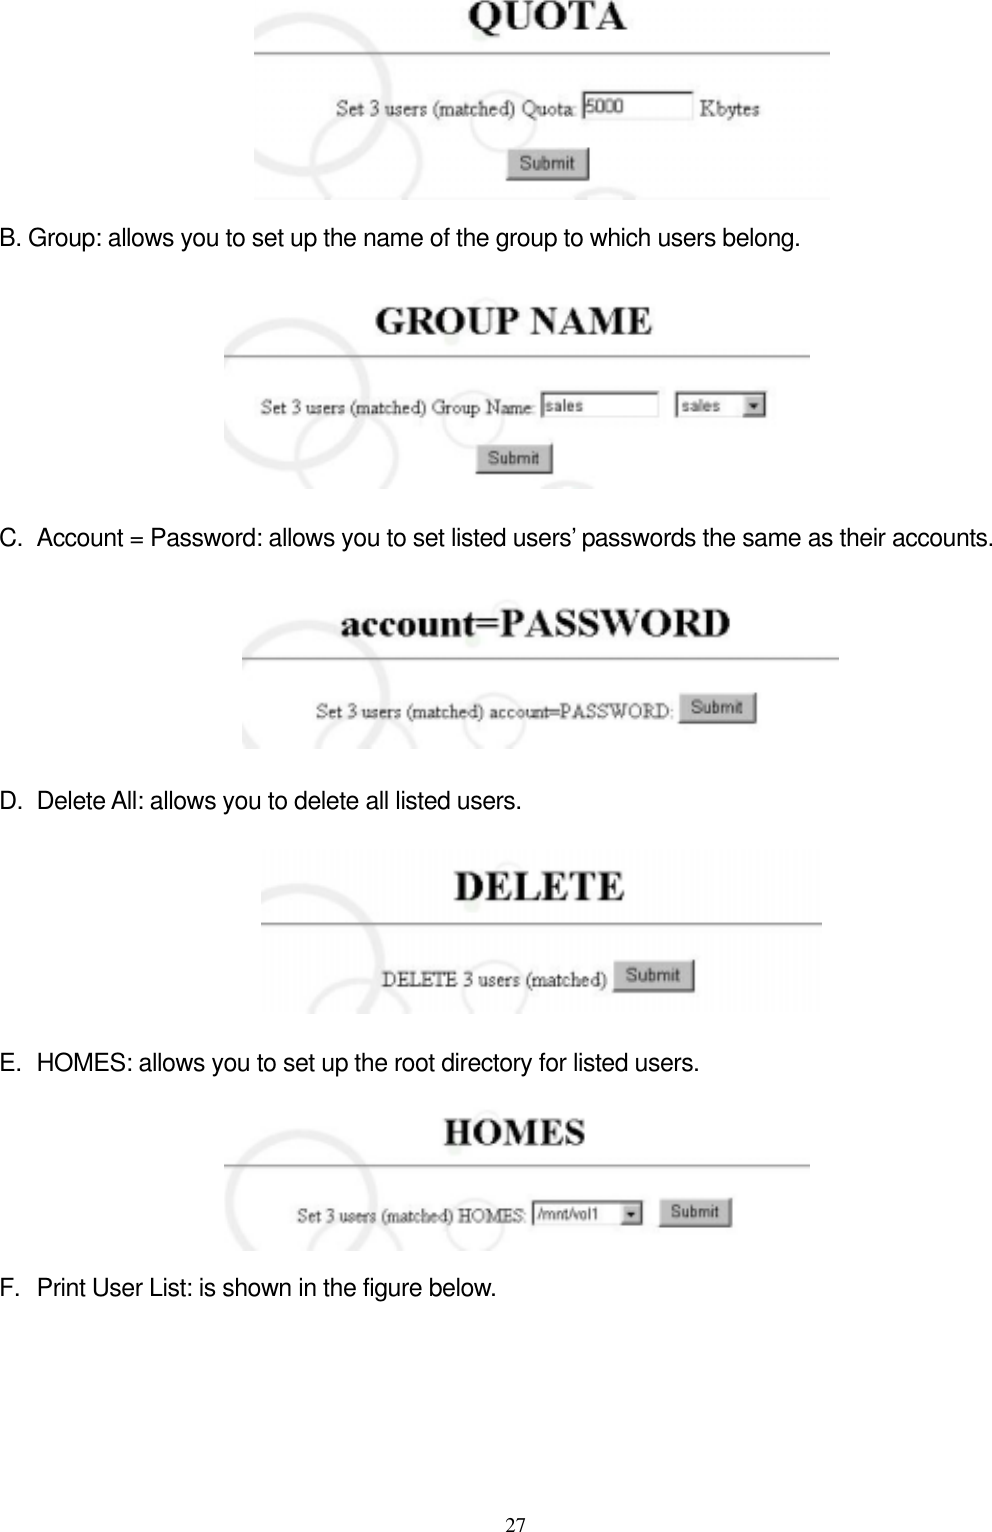  27 B. Group: allows you to set up the name of the group to which users belong.  C.  Account = Password: allows you to set listed users’ passwords the same as their accounts.  D.  Delete All: allows you to delete all listed users.  E.  HOMES: allows you to set up the root directory for listed users.          F.  Print User List: is shown in the figure below. 